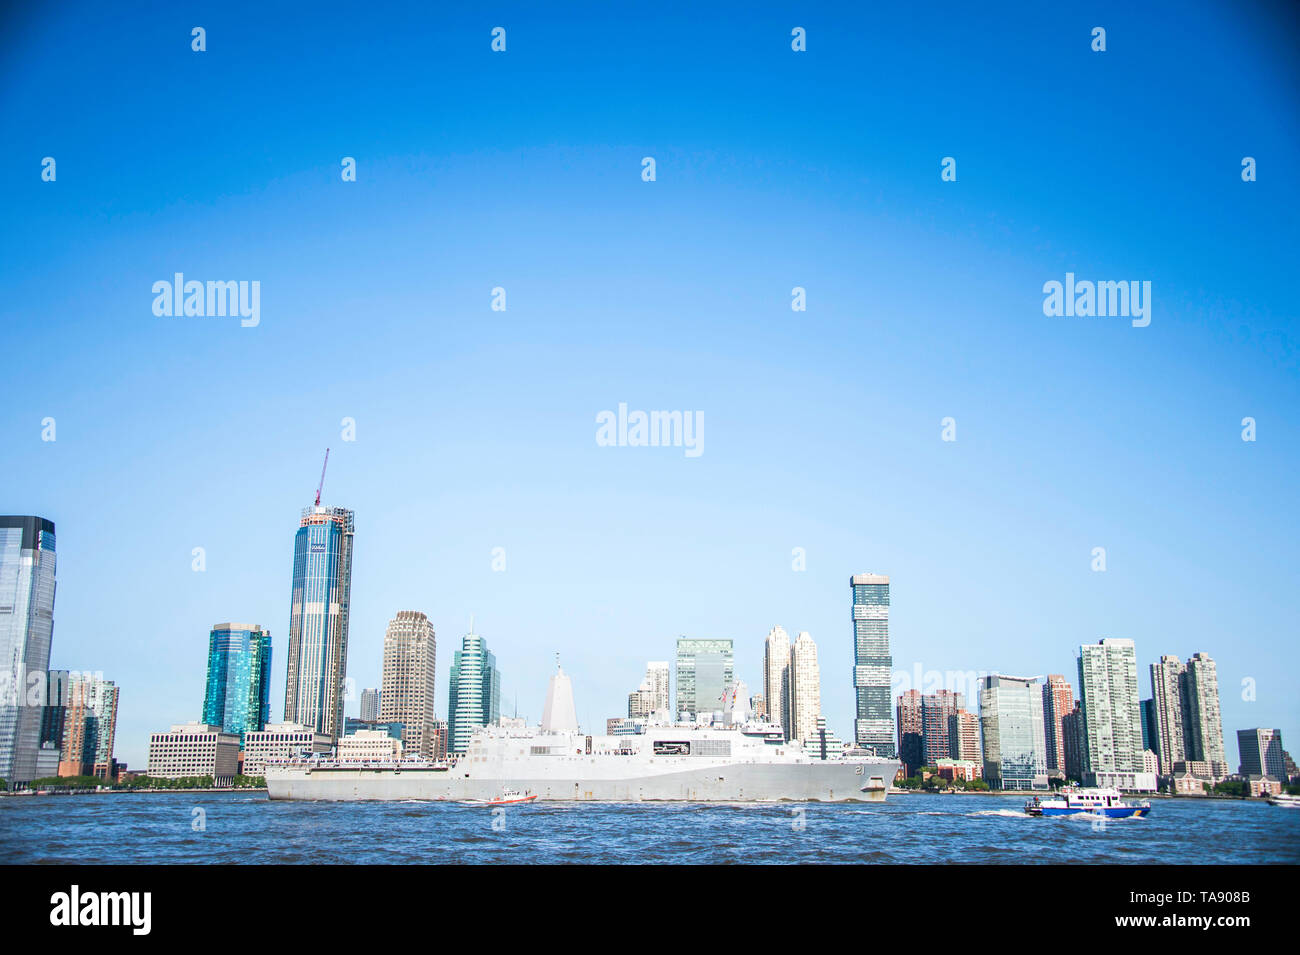 190522-N-XQ474-0032 NEW YORK (May 22, 2019) The San Antonio-class amphibious transport dock USS New York (LPD 21) transits the Hudson River en route to a pier in Manhattan during Fleet Week New York. Fleet Week New York, now in its 31st year, is the city's time-honored celebration of the sea services. It is an unparalleled opportunity for the citizens of New York and the surrounding tri-state area to meet Sailors, Marines and Coast Guardsmen, as well as witness firsthand the latest capabilities of today's maritime services. (U.S. Navy photo by Mass Communication Specialist 2nd Class Andrew Sch Stock Photo